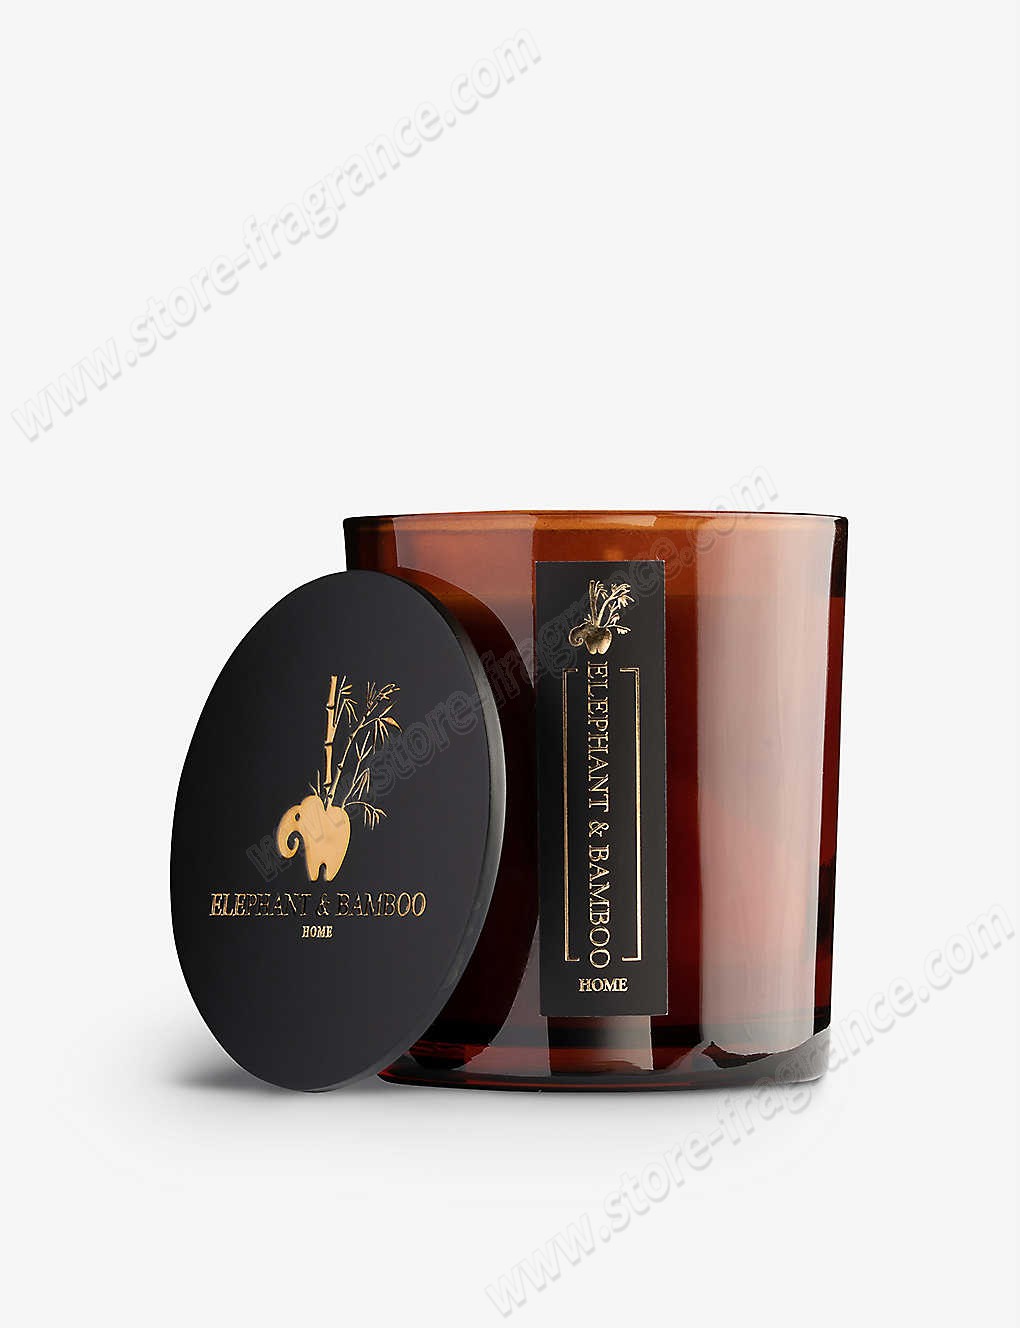 ELEPHANT & BAMBOO/Egyptian Amber scented candle 300g ✿ Discount Store - -0